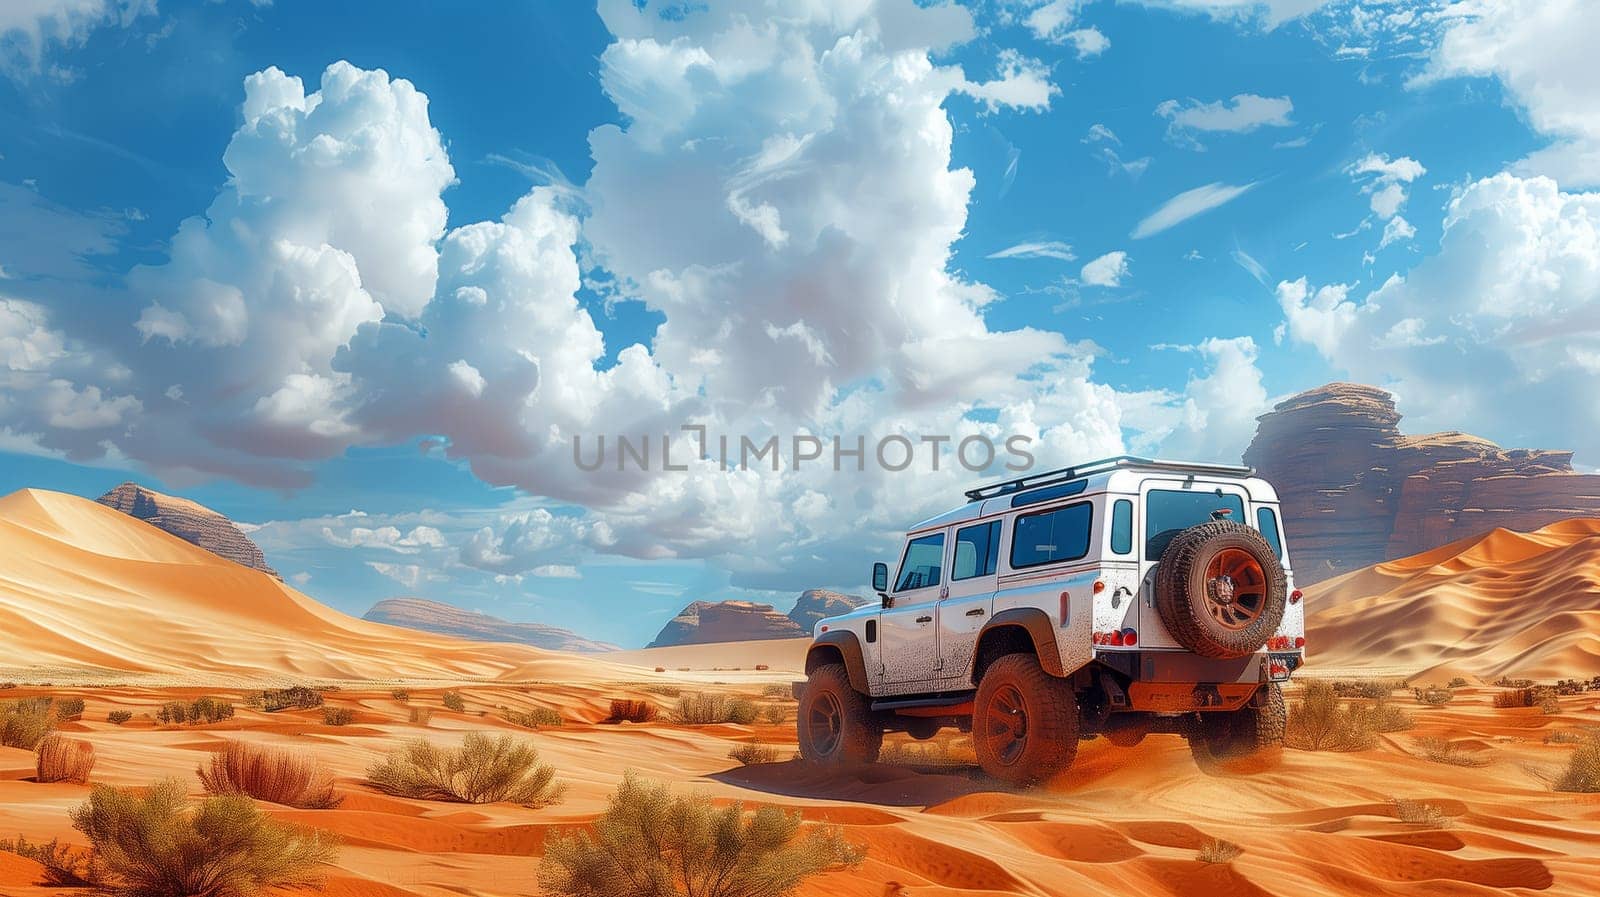 A white vehicle, resembling a jeep, is cruising along a dusty desert road under a clear blue sky with fluffy clouds, kicking up dust with each tire rotation